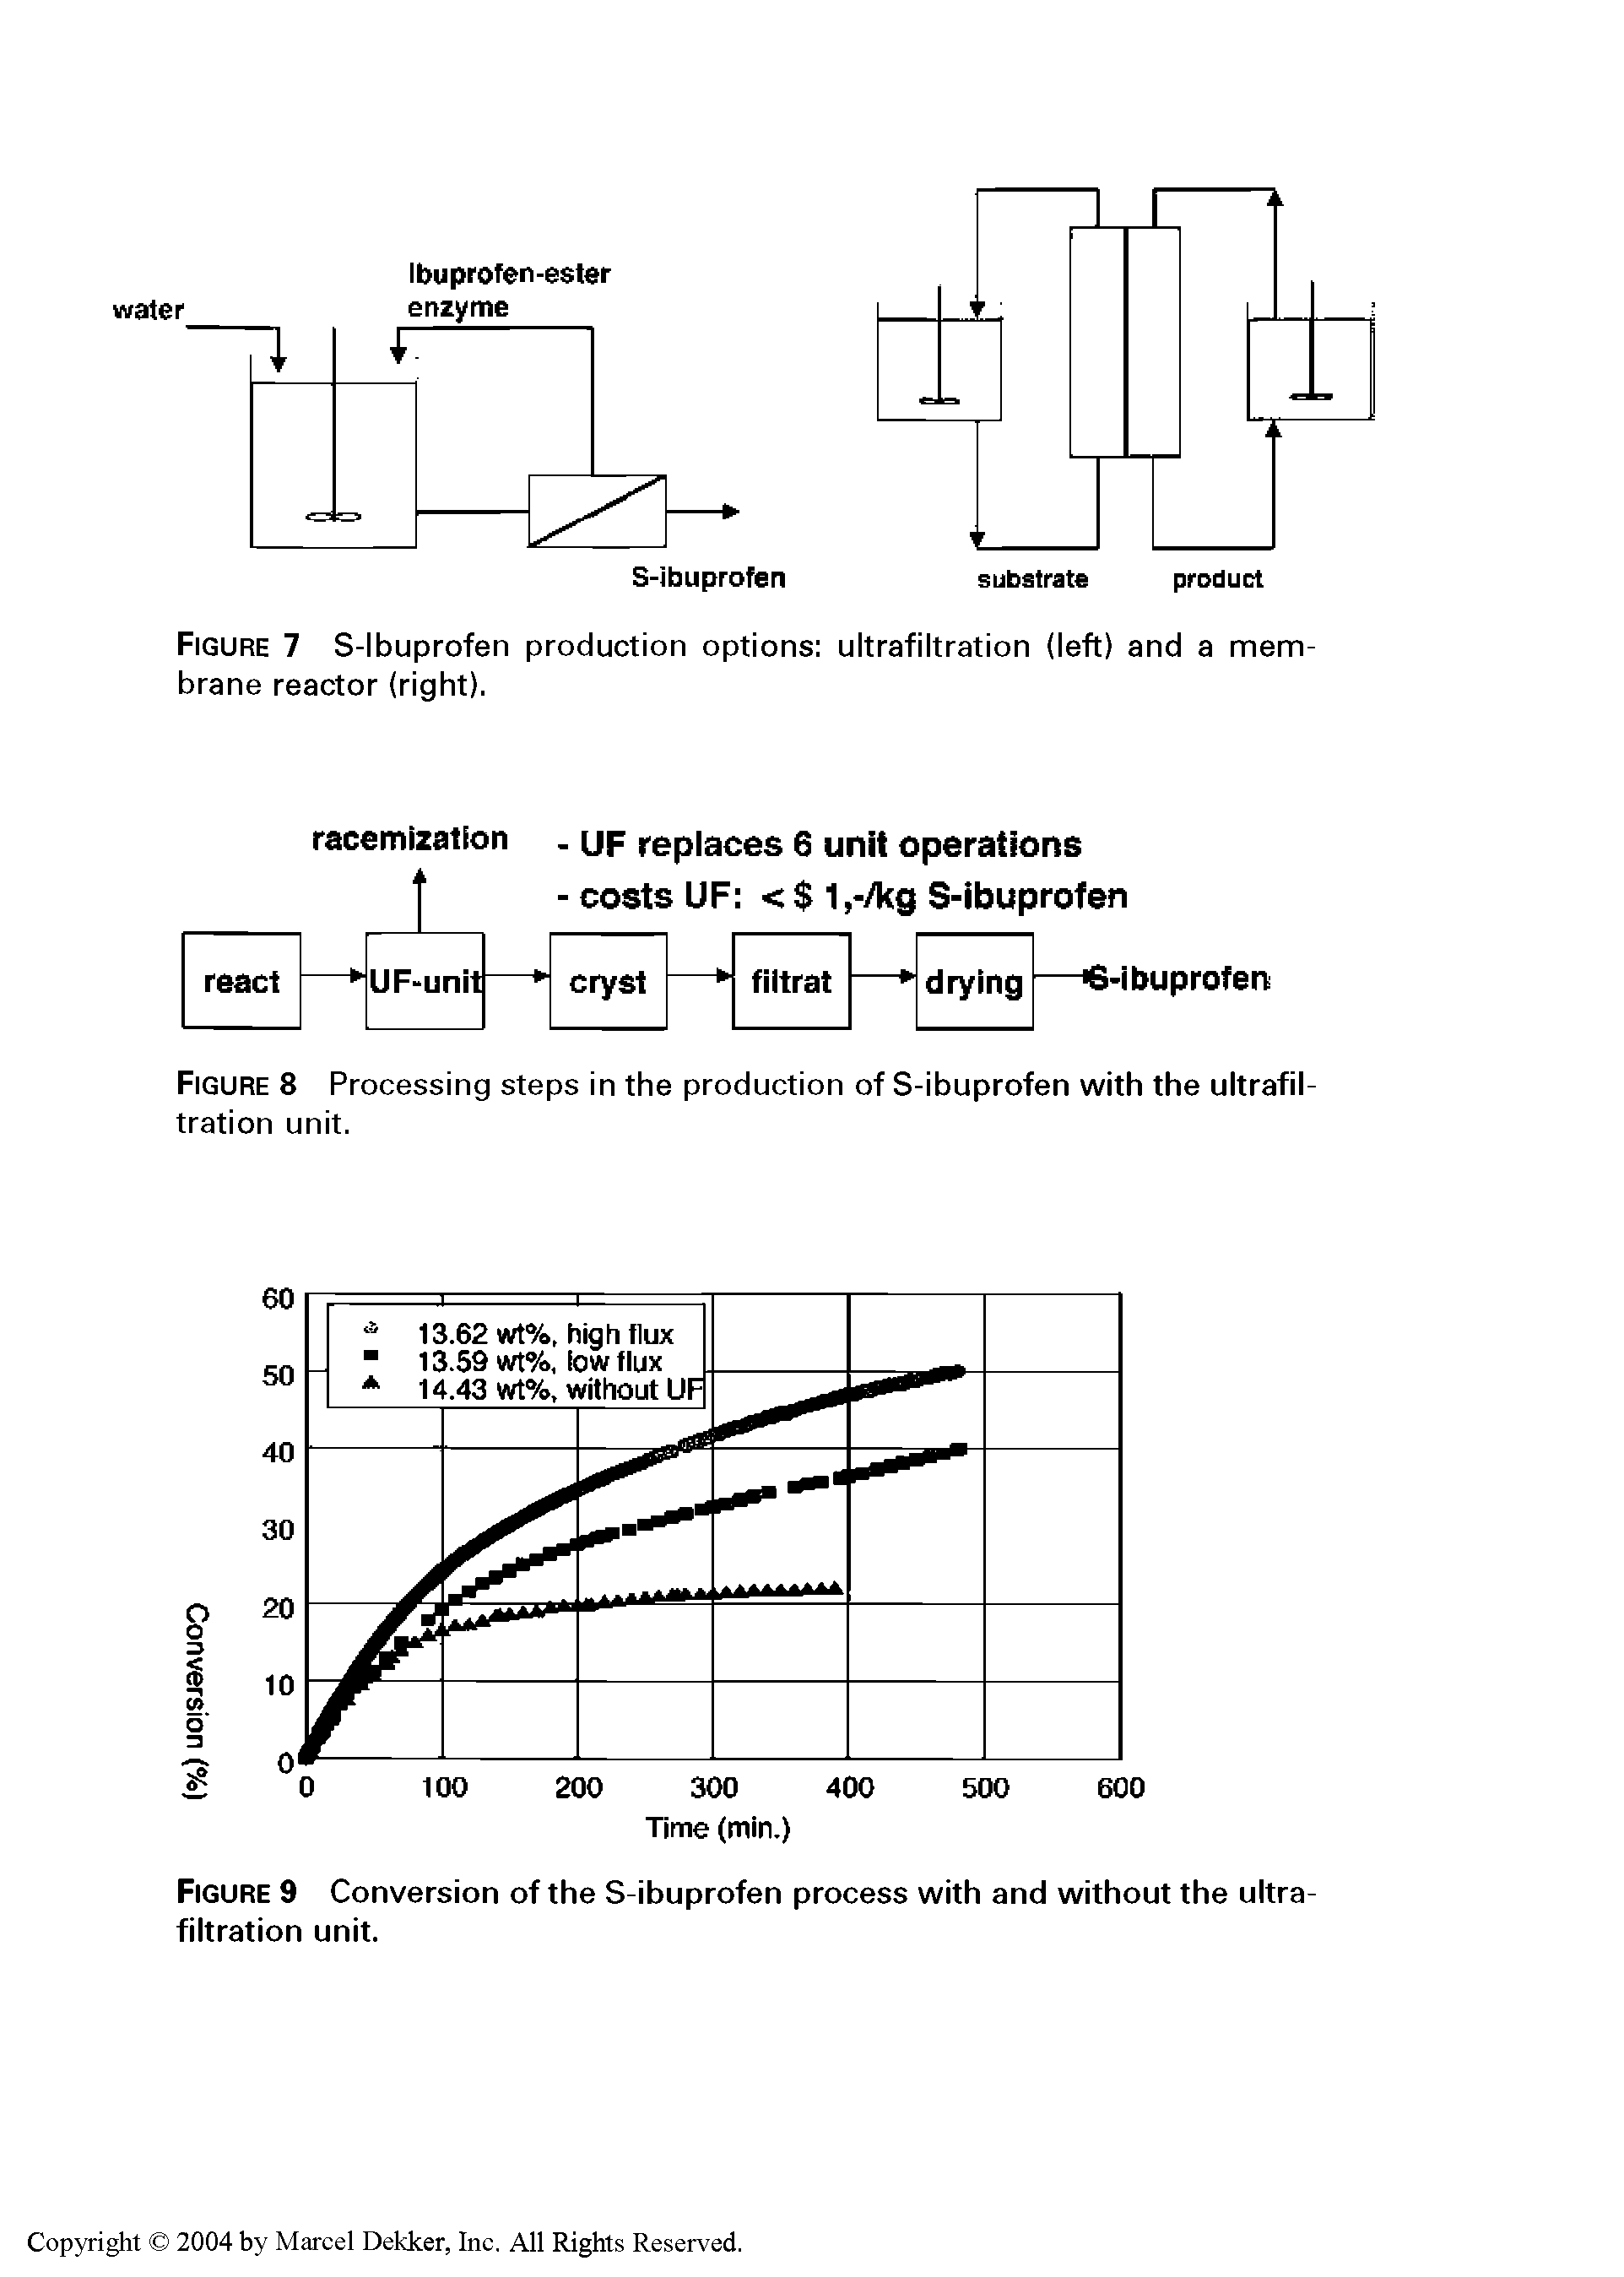 Figure 9 Conversion of the S-ibuprofen process with and without the ultrafiltration unit.